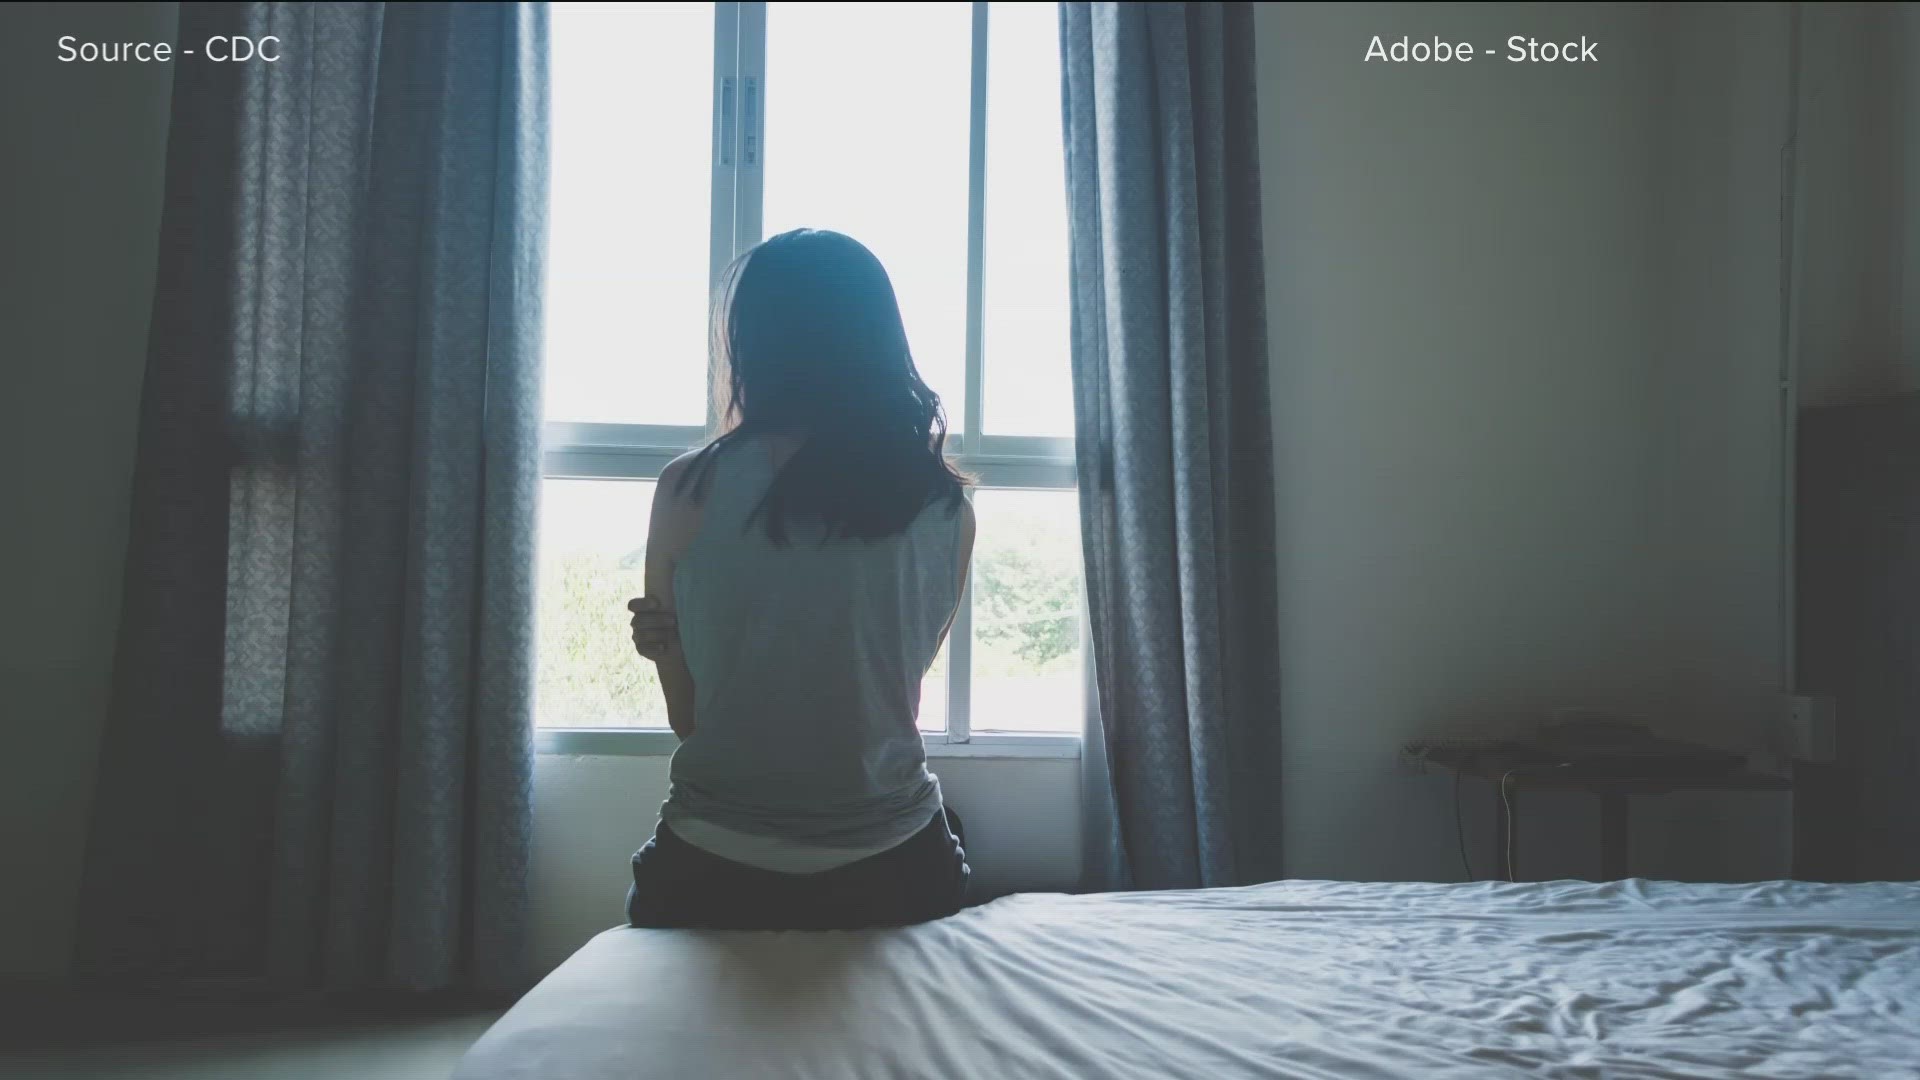 School shootings, violence and the pandemic have led to a teen mental health crisis. The KVUE Defenders looked into what can be done to address the crisis.